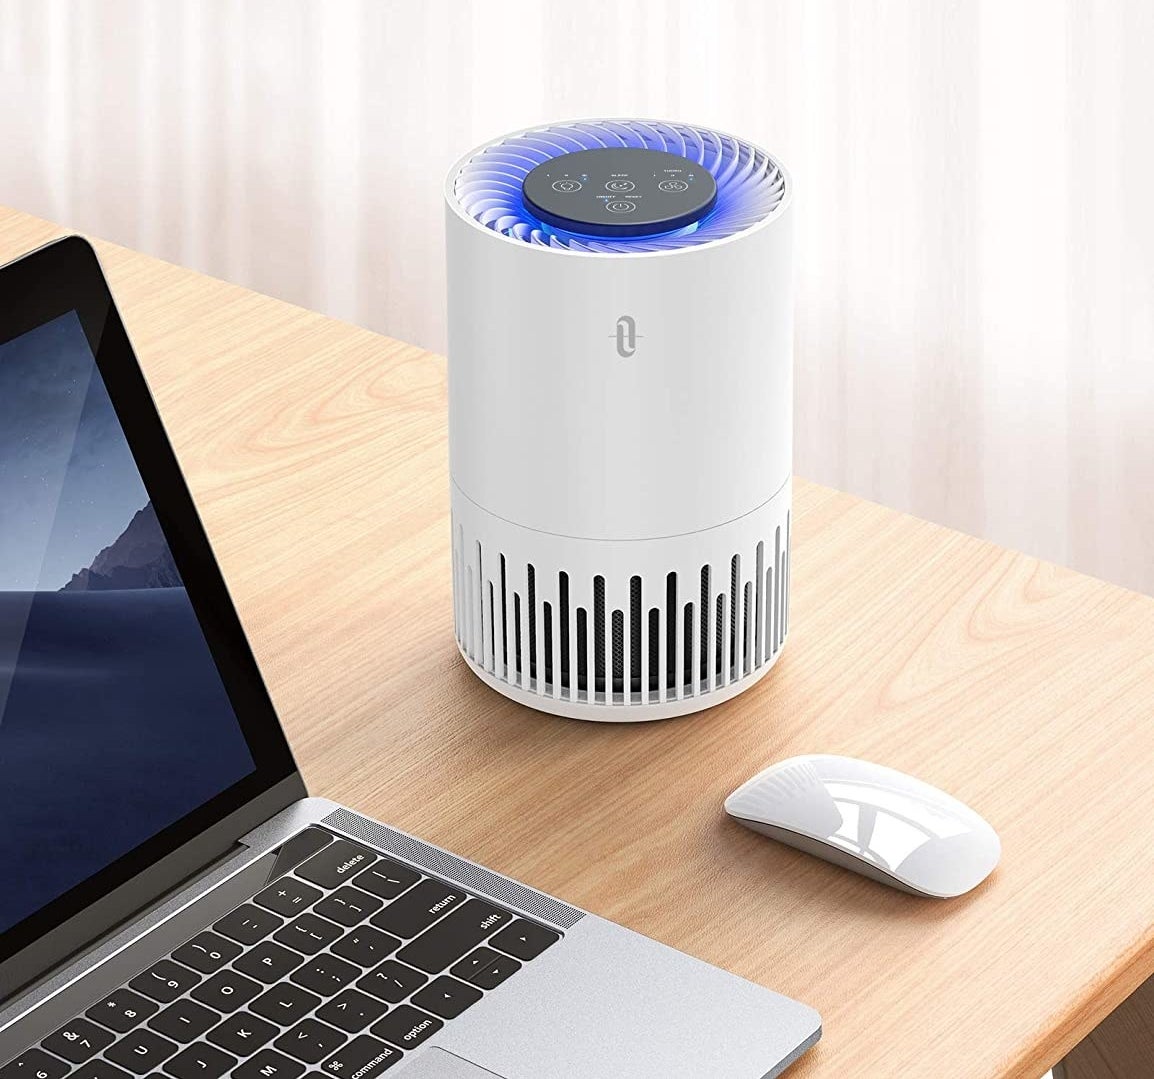 The air purifier on a desk next to a laptop